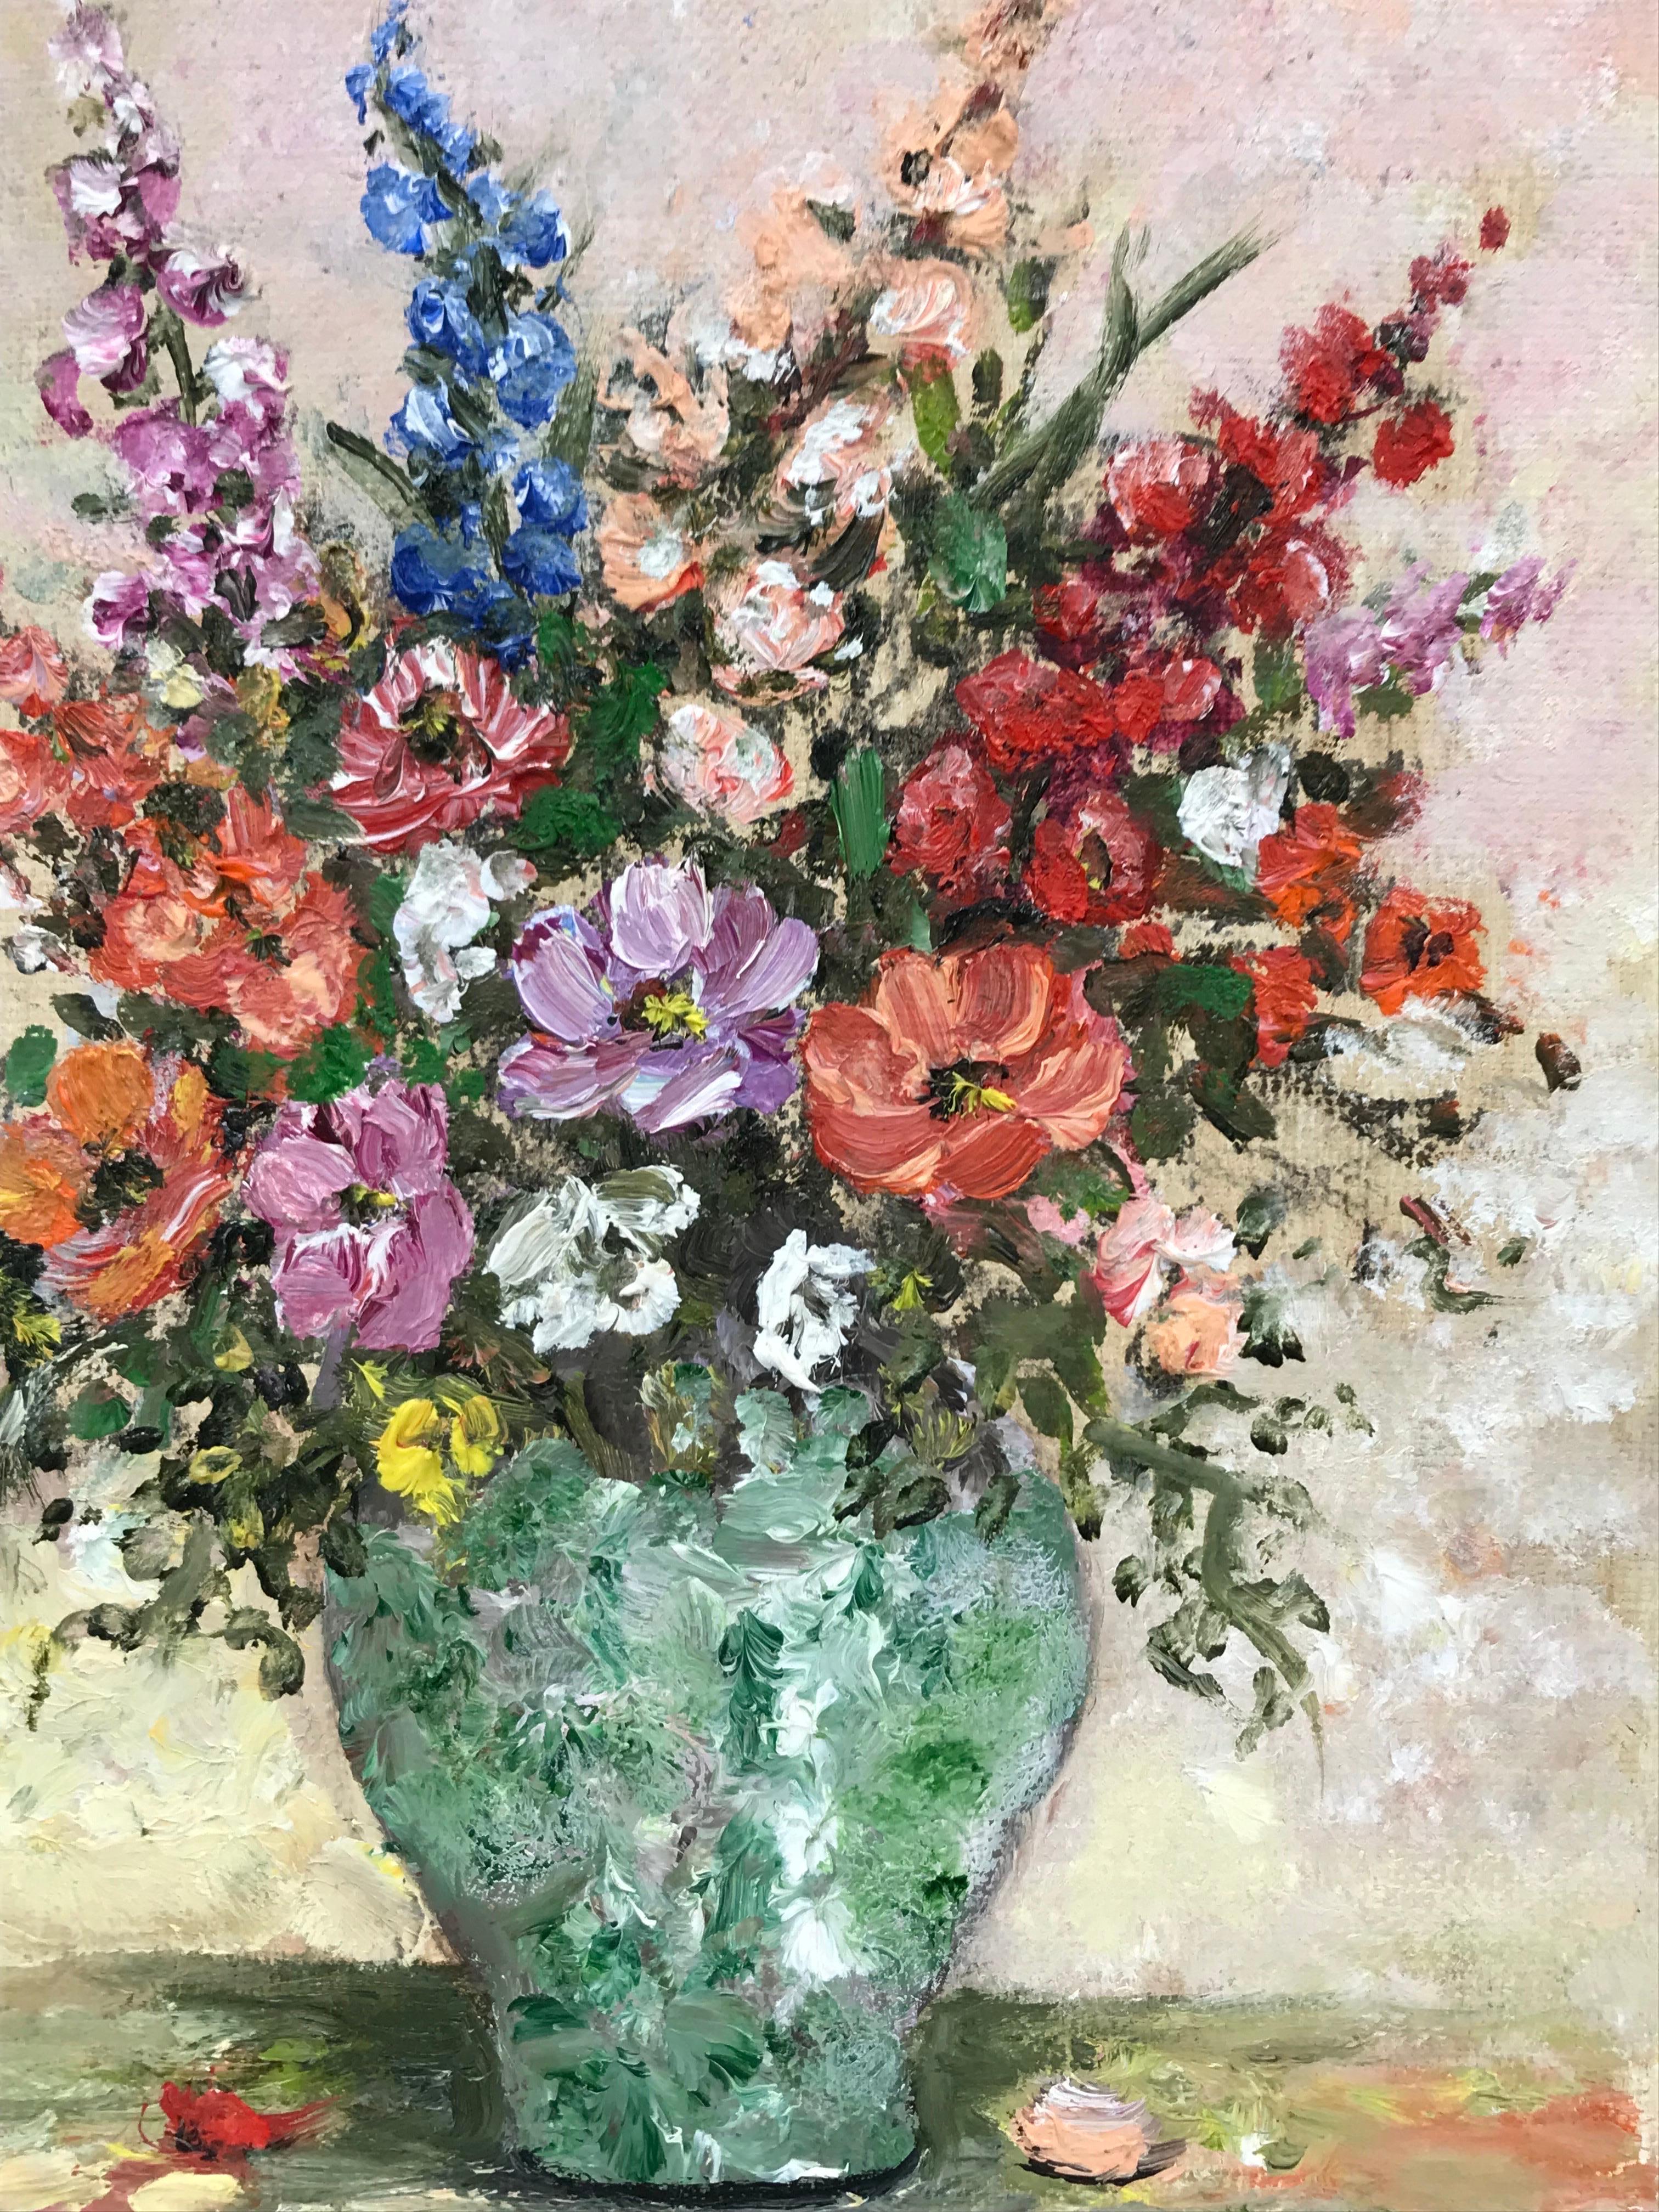 Artist/ School: B. Rigaudiere (French late 20th century)

Title: Bouquet of Flowers

Medium: oil painting on canvas, unframed

canvas : 8.75 x 6.25 inches

Provenance: private collection of this artists work in Giverny, France

Condition: The